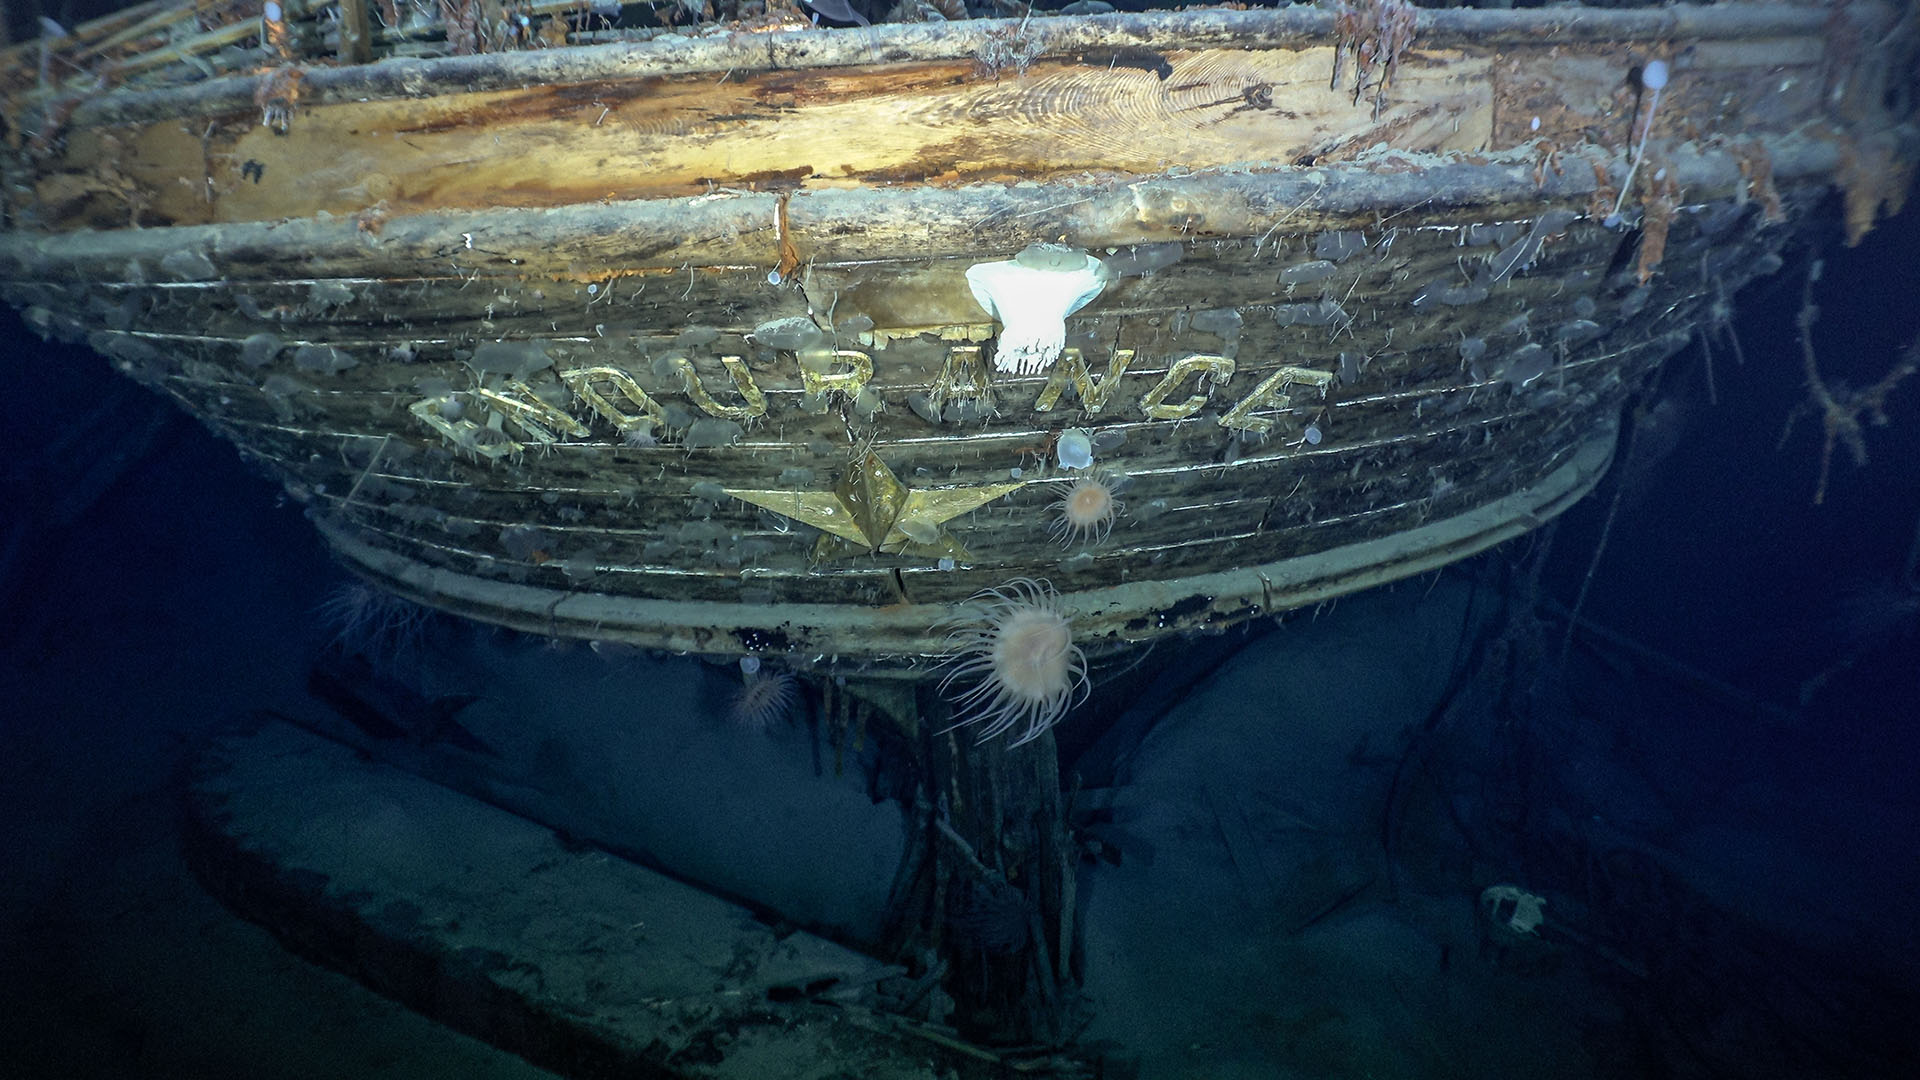 The stern of the wreck of Endurance.